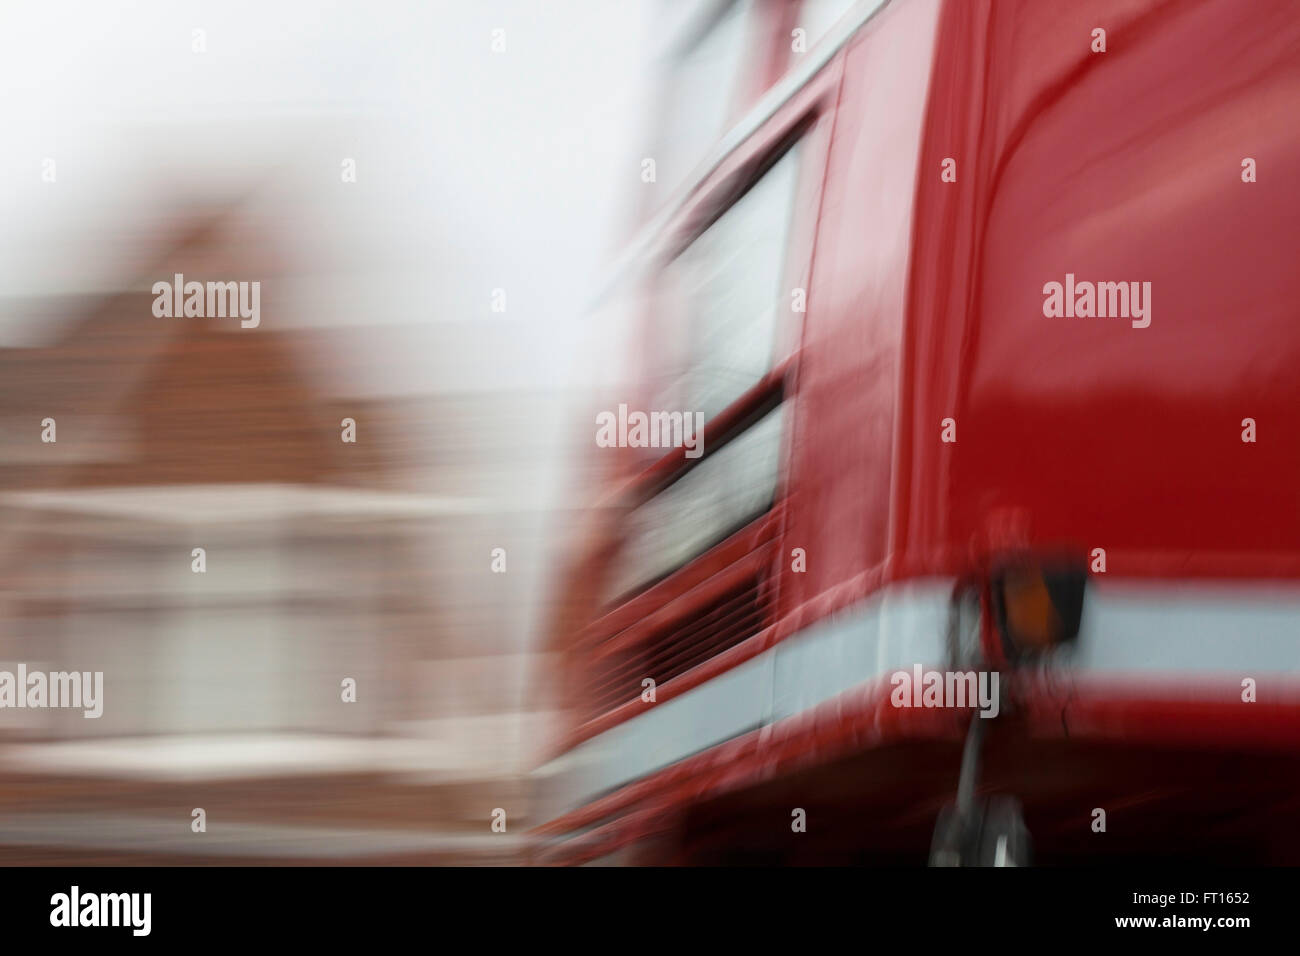 A blurred image of a london buss passing by on its journey through the capital city. Stock Photo